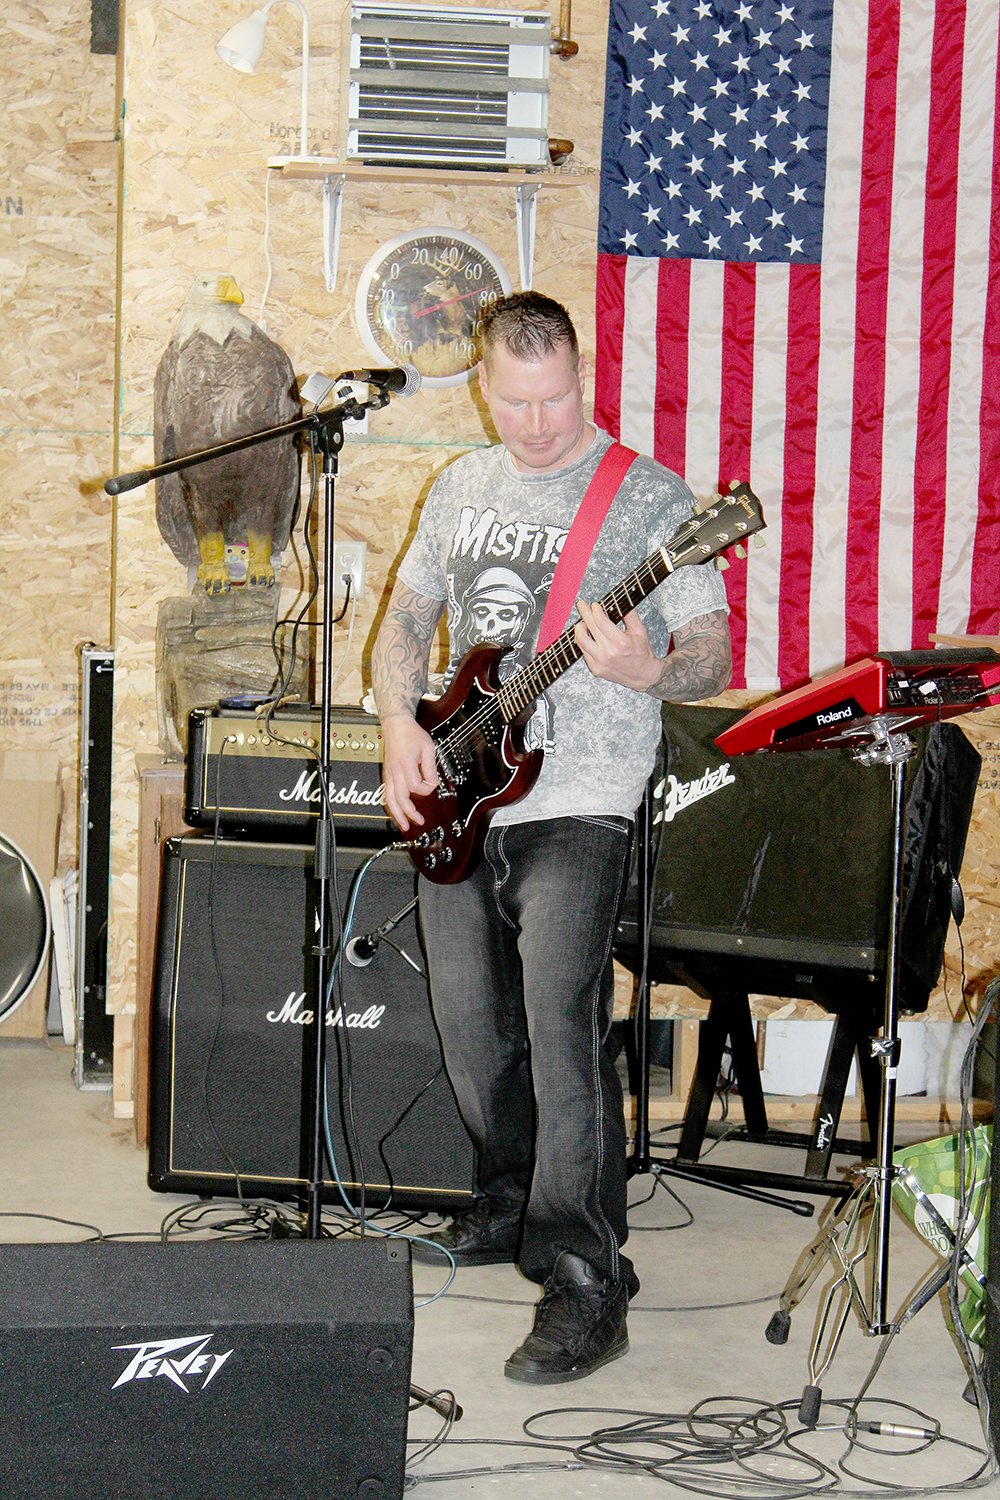 Chaz Wagner of War Bonnet plays rhythm guitar during a rehearsal on Sunday, Aug. 4 in Cook.